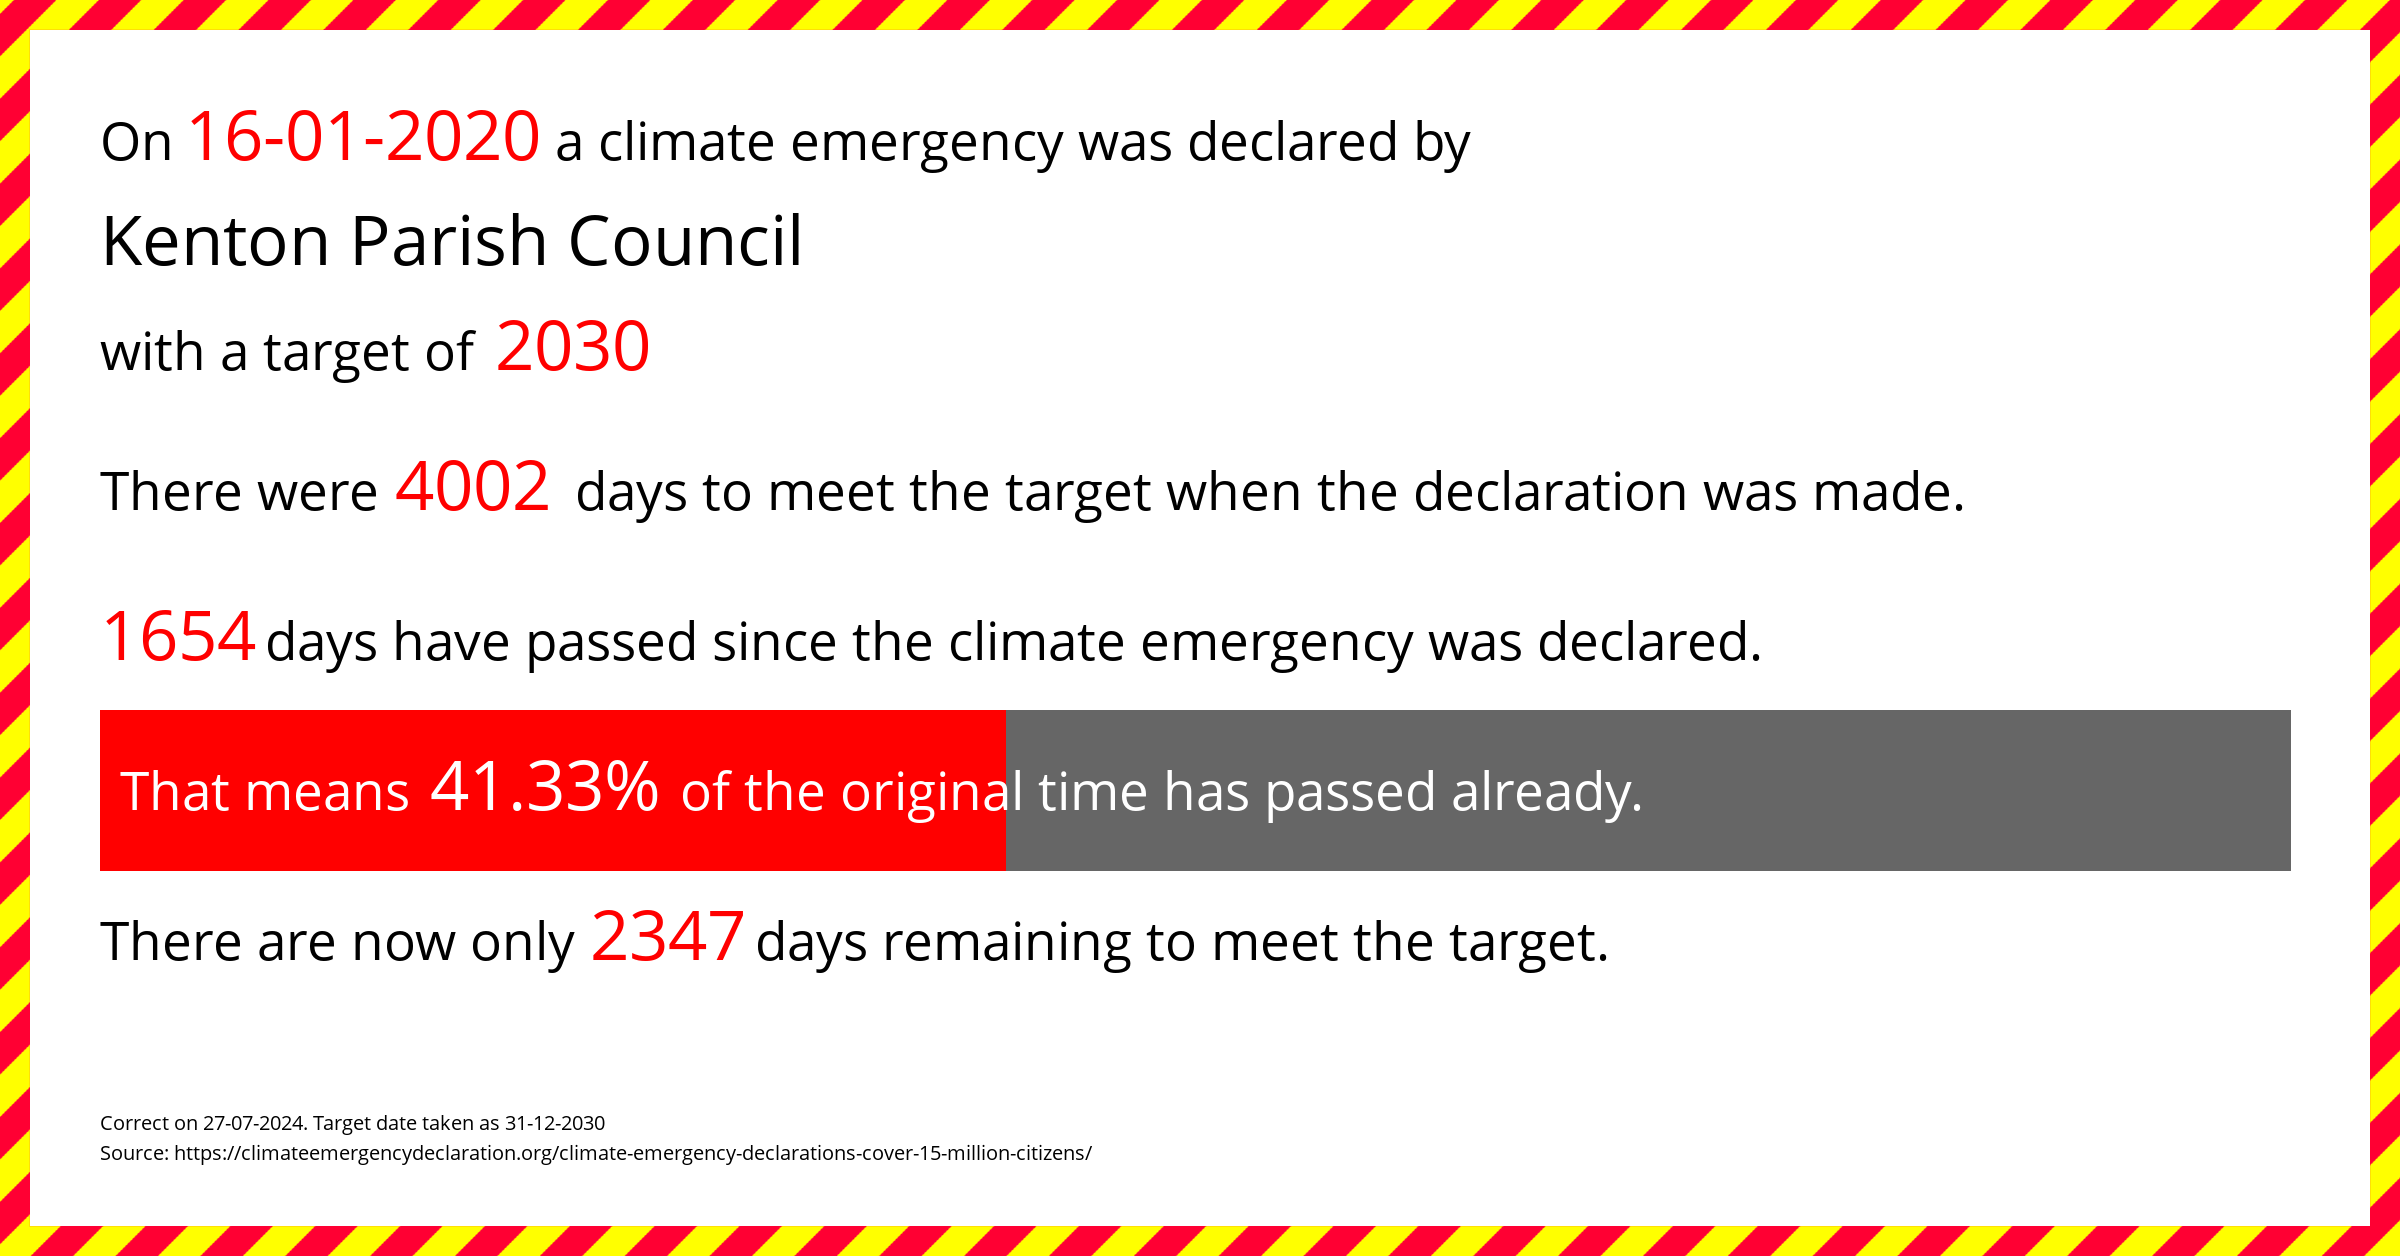 Kenton Parish Council declared a Climate emergency on Thursday 16th January 2020, with a target of 2030.